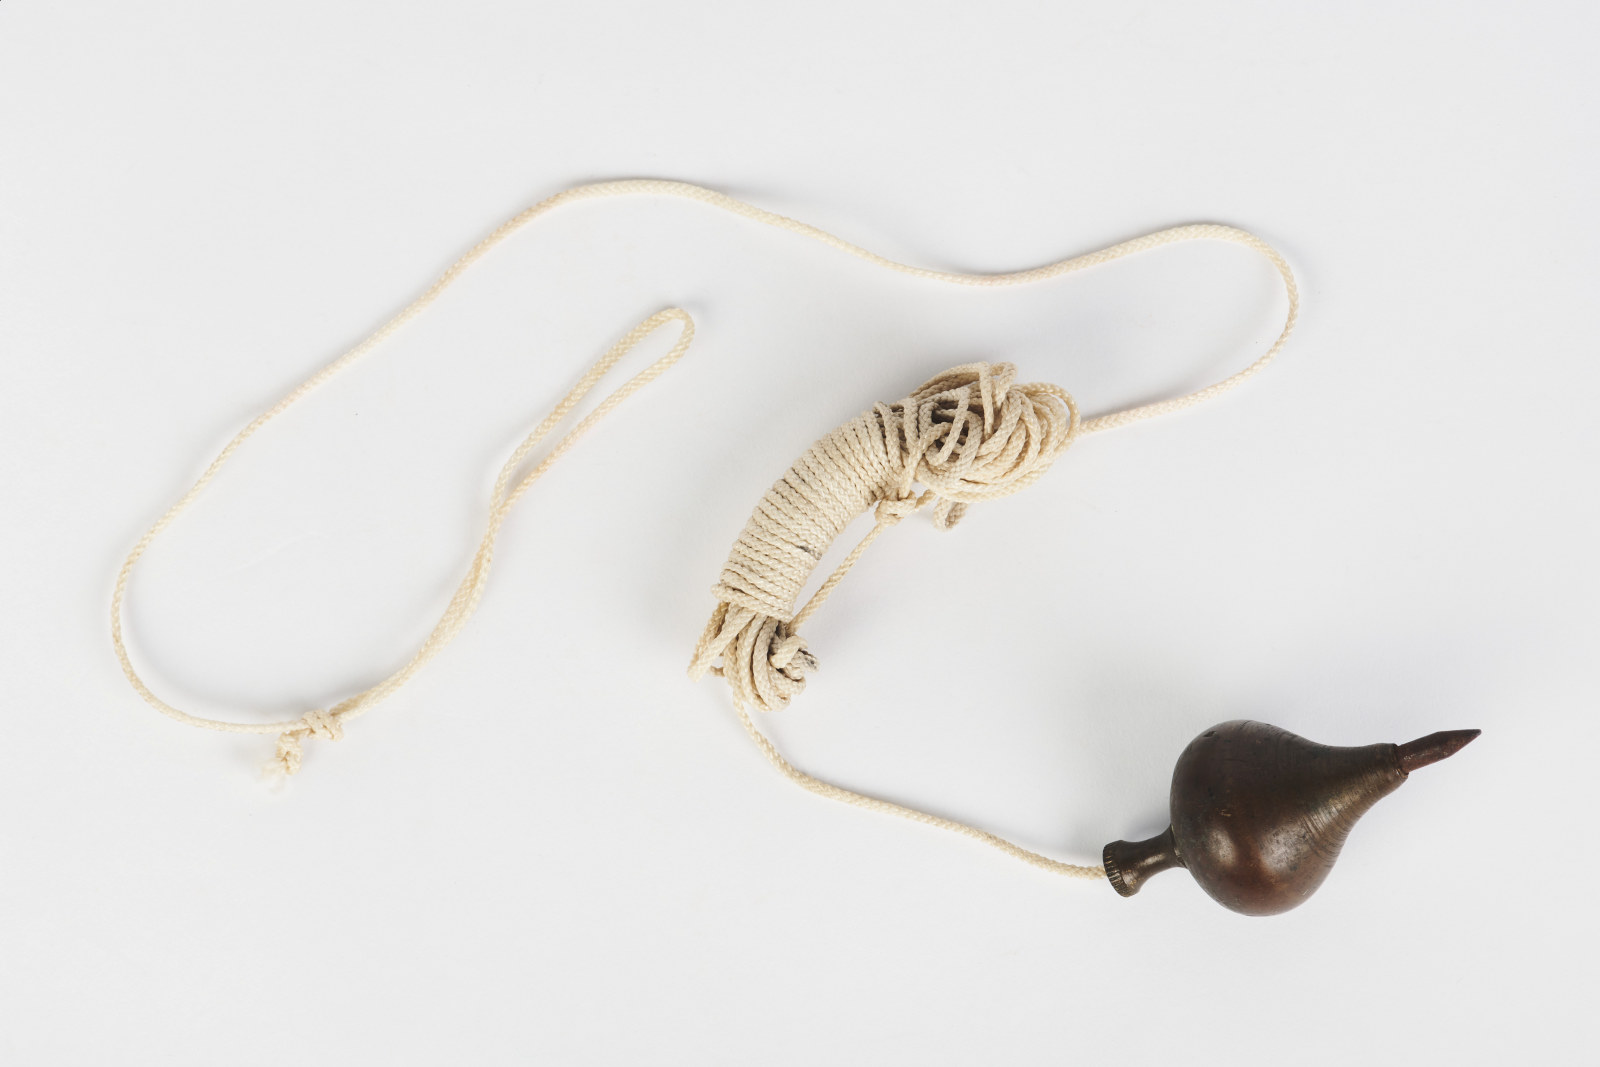 Dark and heavy metal plumb-bob with attached plaited synthetic cord, used by Max Fry during refurbishments of the Hyde Park Barracks, circa 1950s